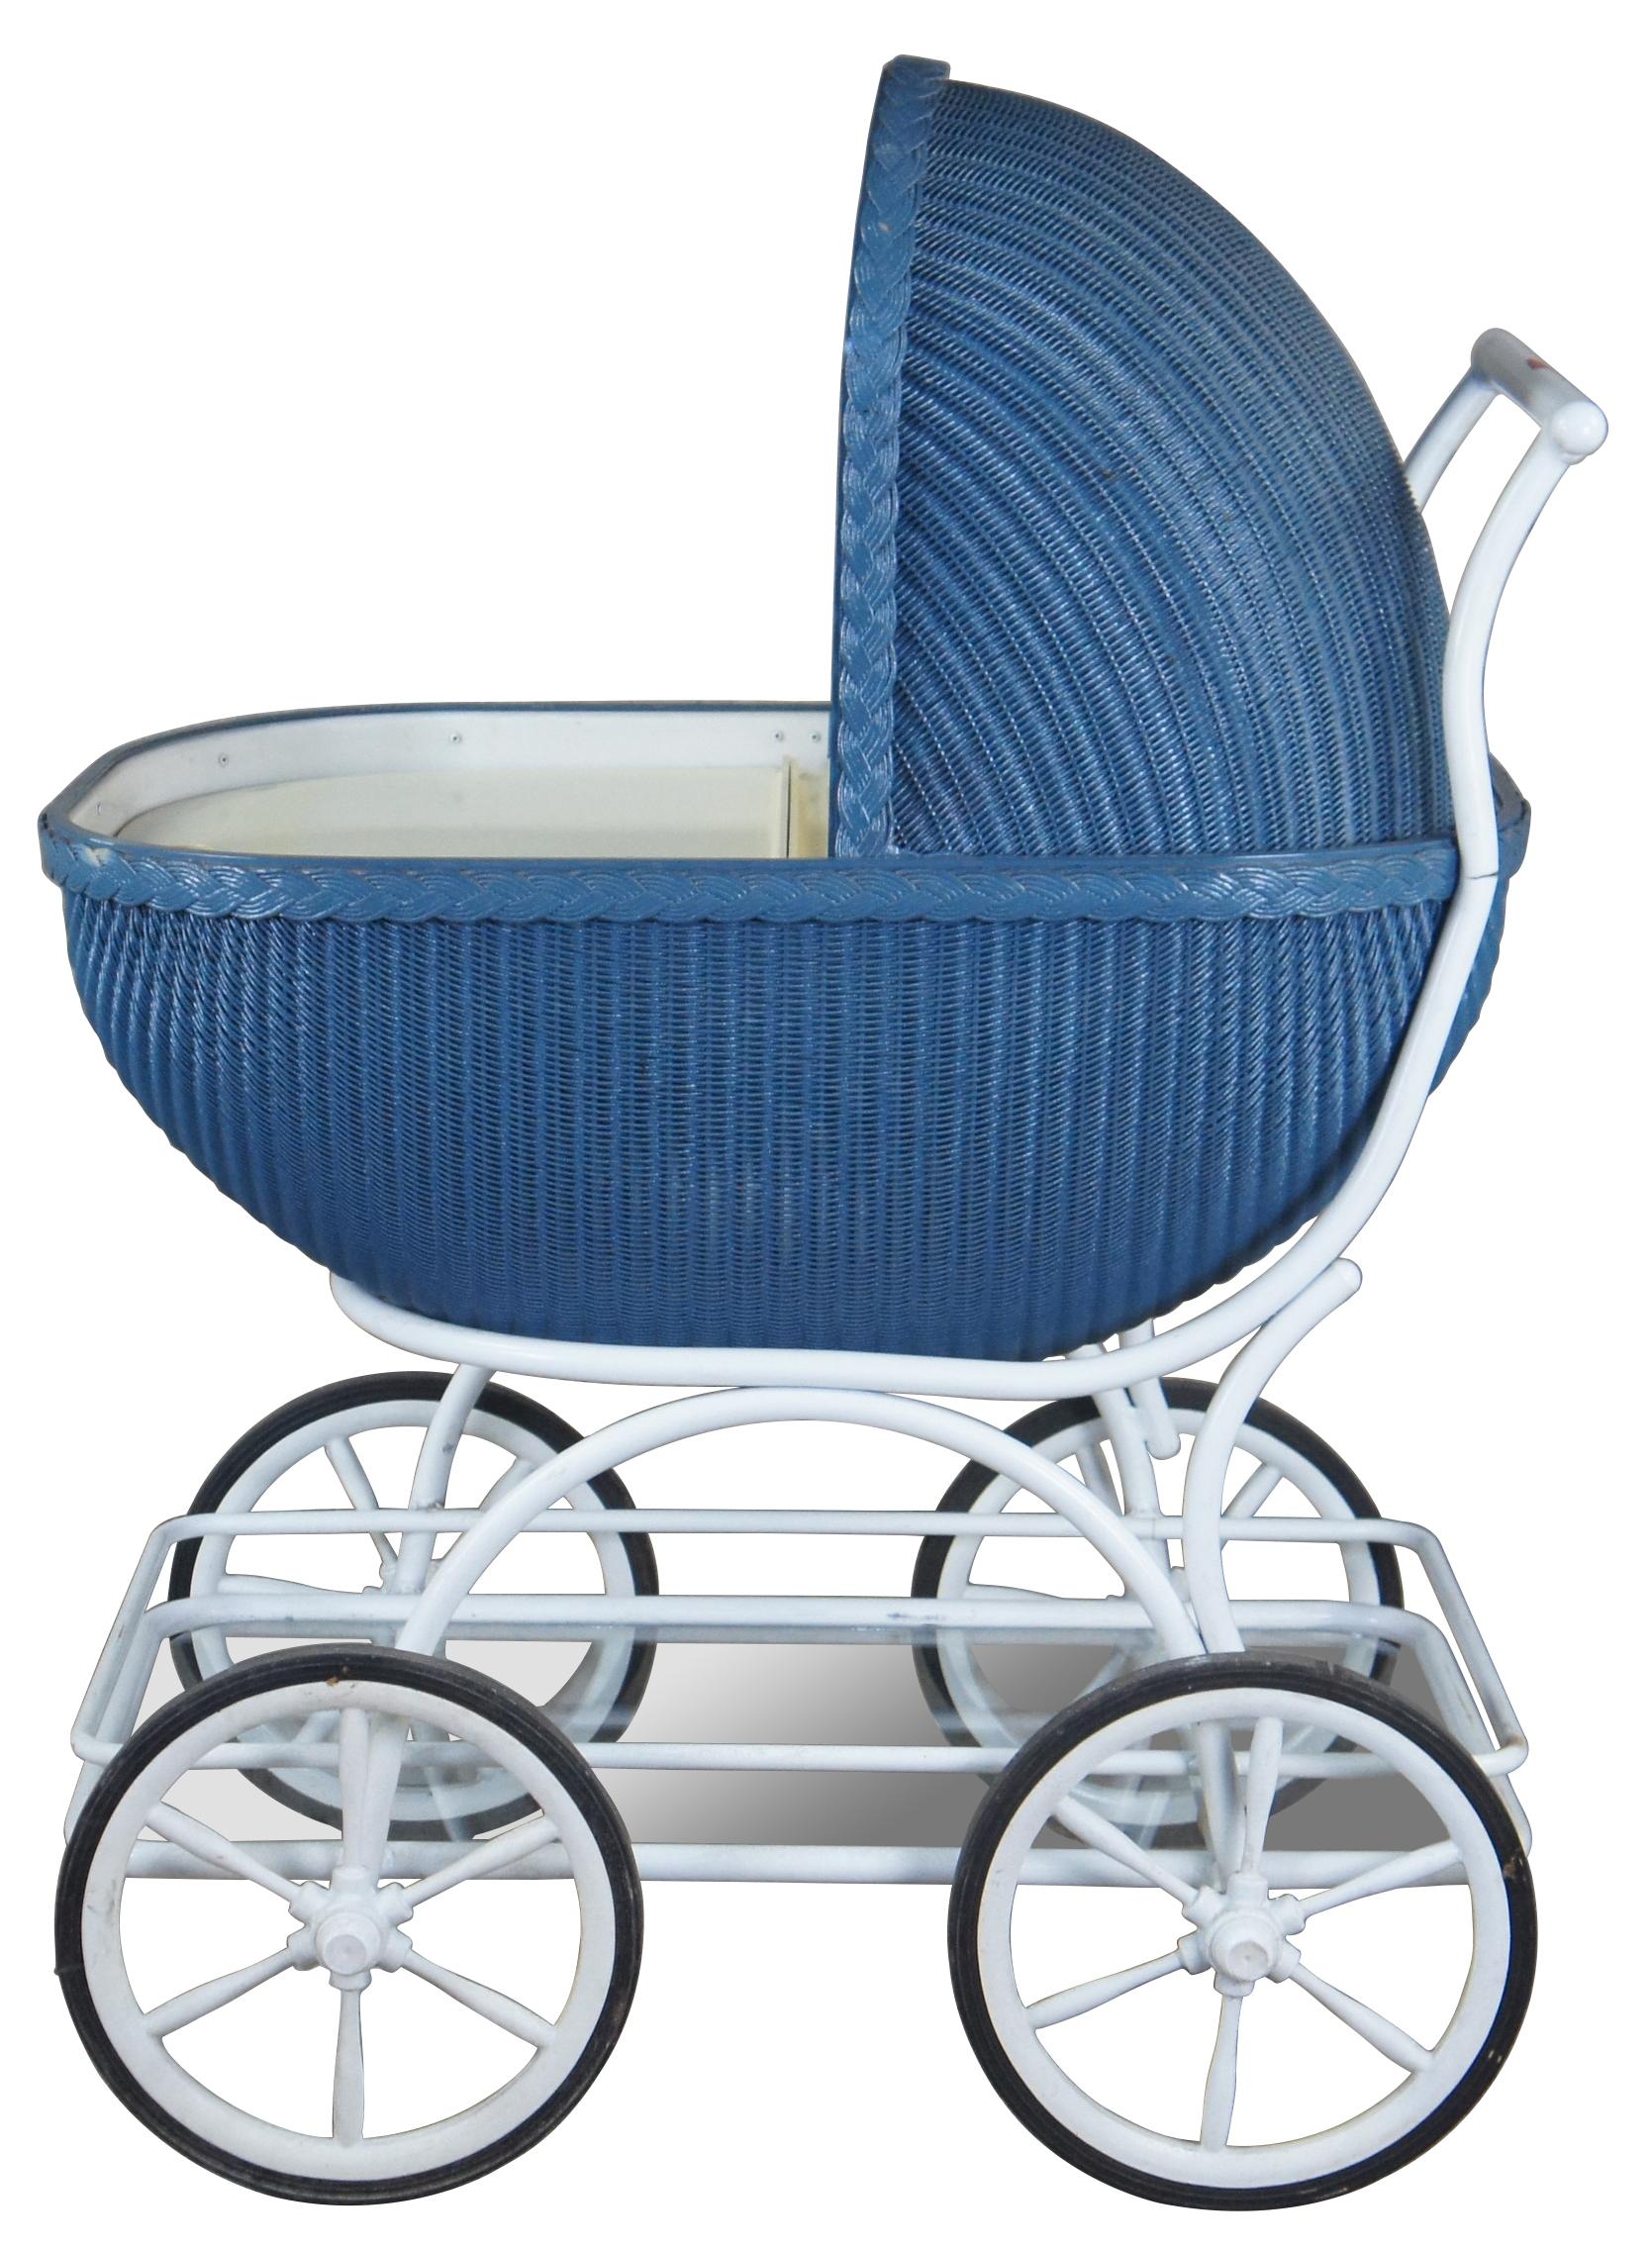 Mid century faux baby stroller beverage cooler or cart. Made of wicker with tubular metal frame featuring a top that flips to access both sides of cooler, plug to drain the melted ice, and a lower glass tier with gallery for supply storage.
 